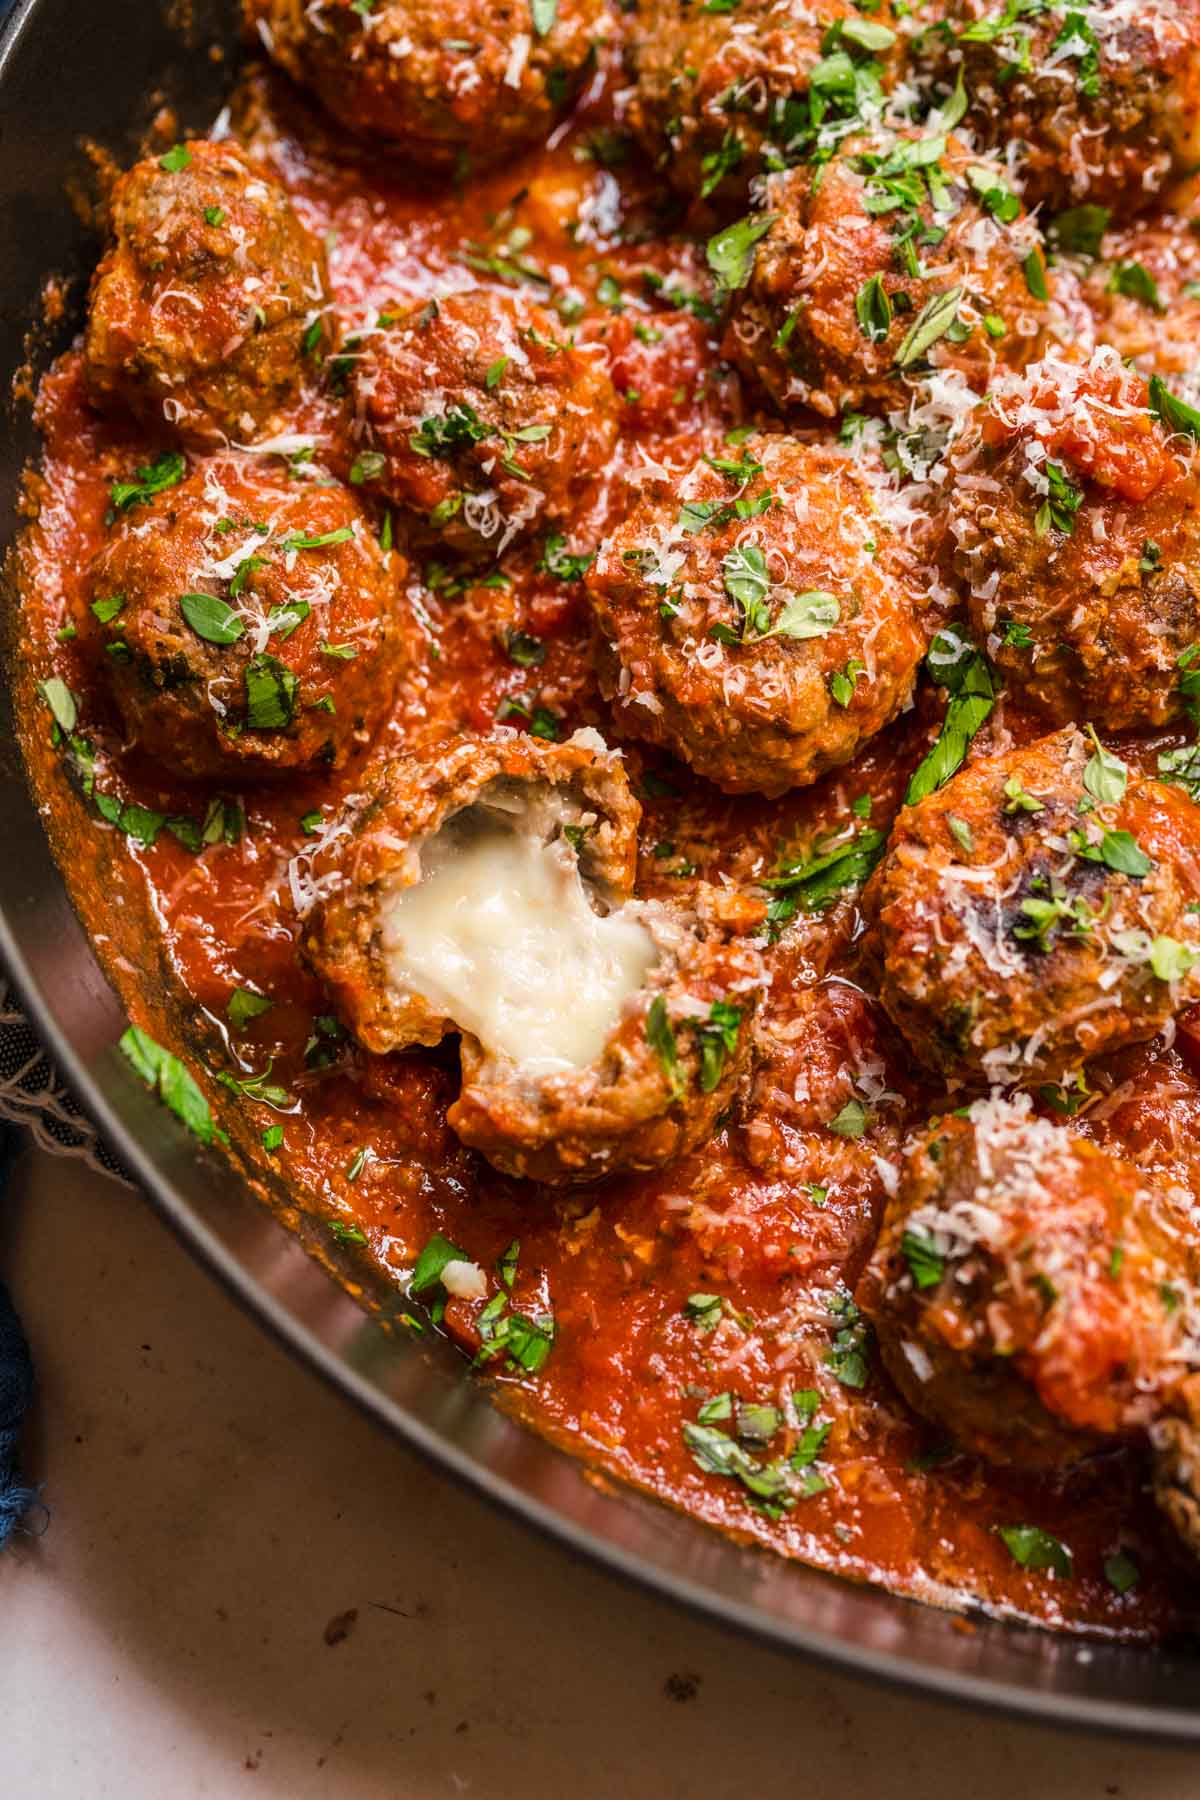 Mozzarella Stuffed Meatballs in sauce in skillet, showing melty cheese